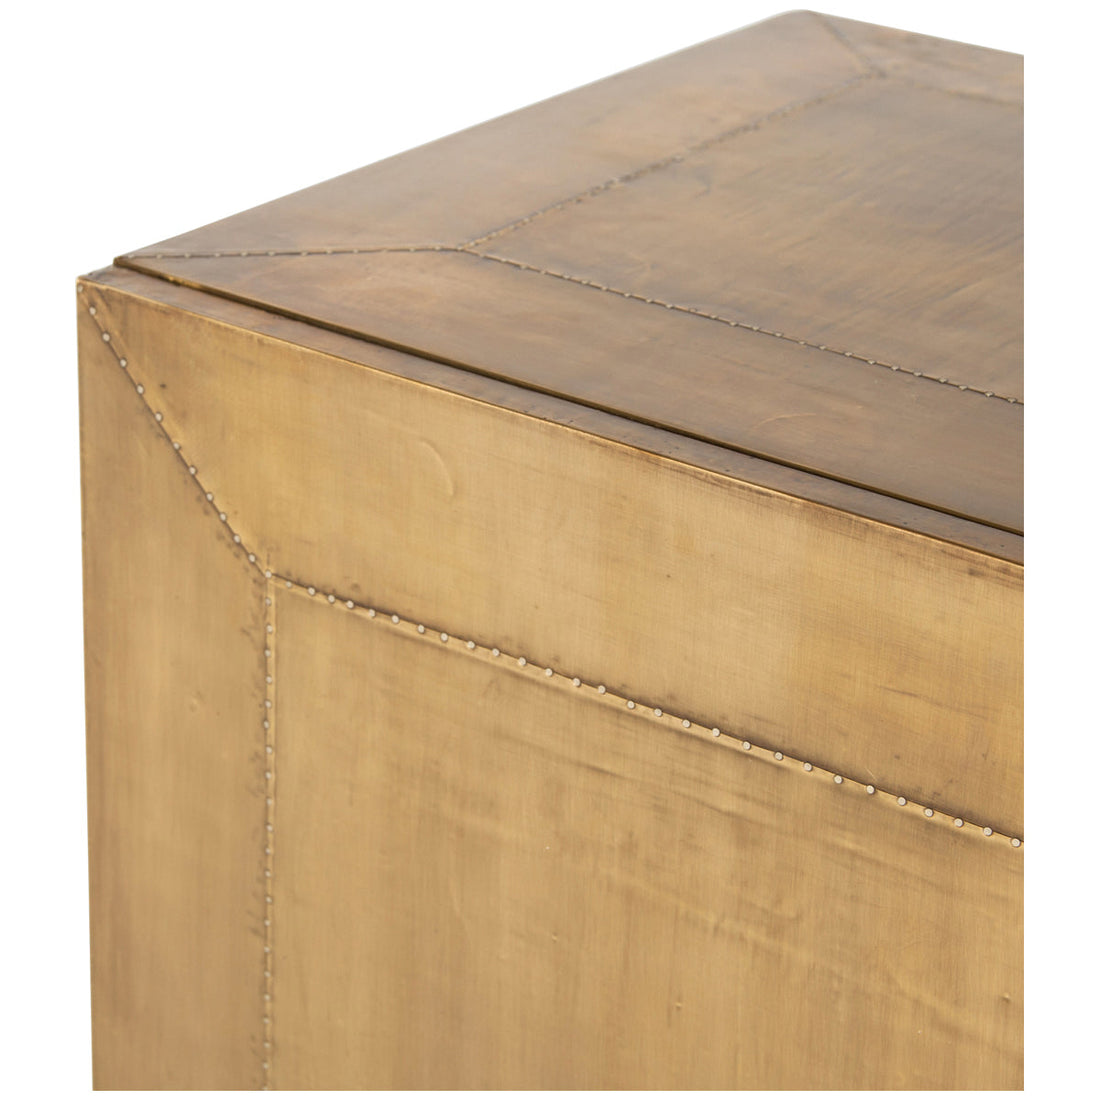 Four Hands Rockwell Freda Sideboard - Aged Brass